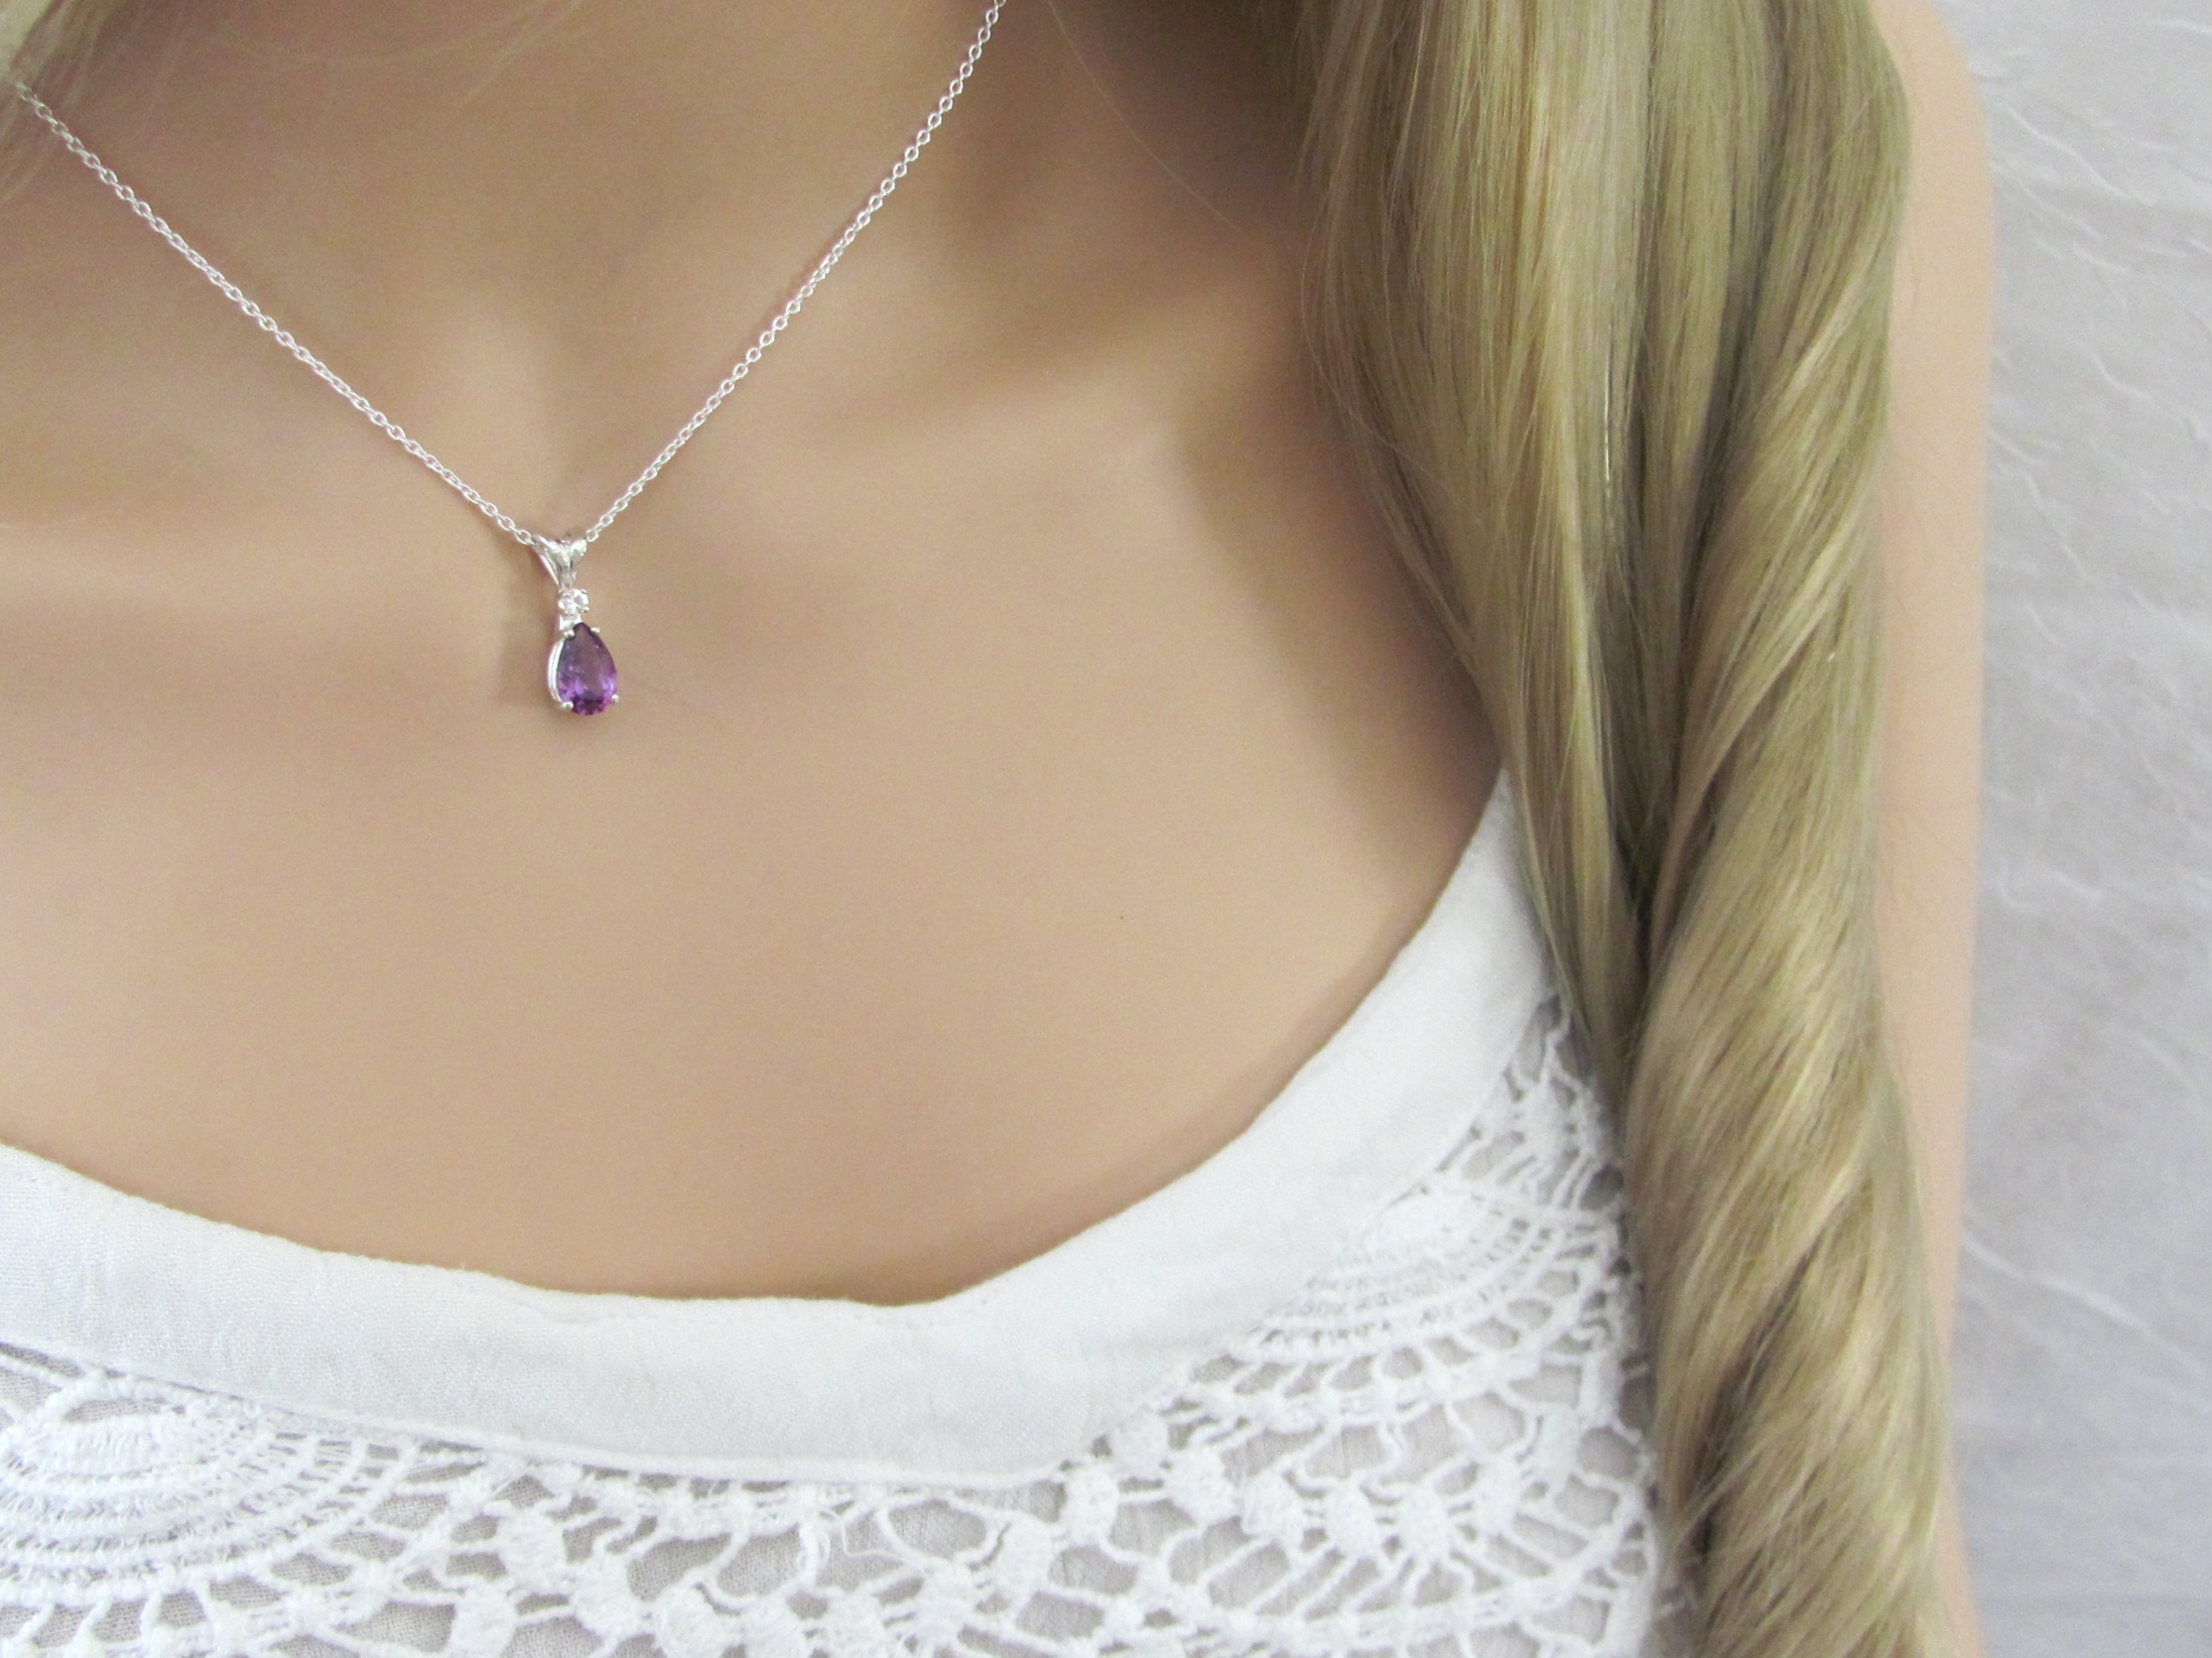 Alexandrite Necklace Pear Cut in Sterling Silver